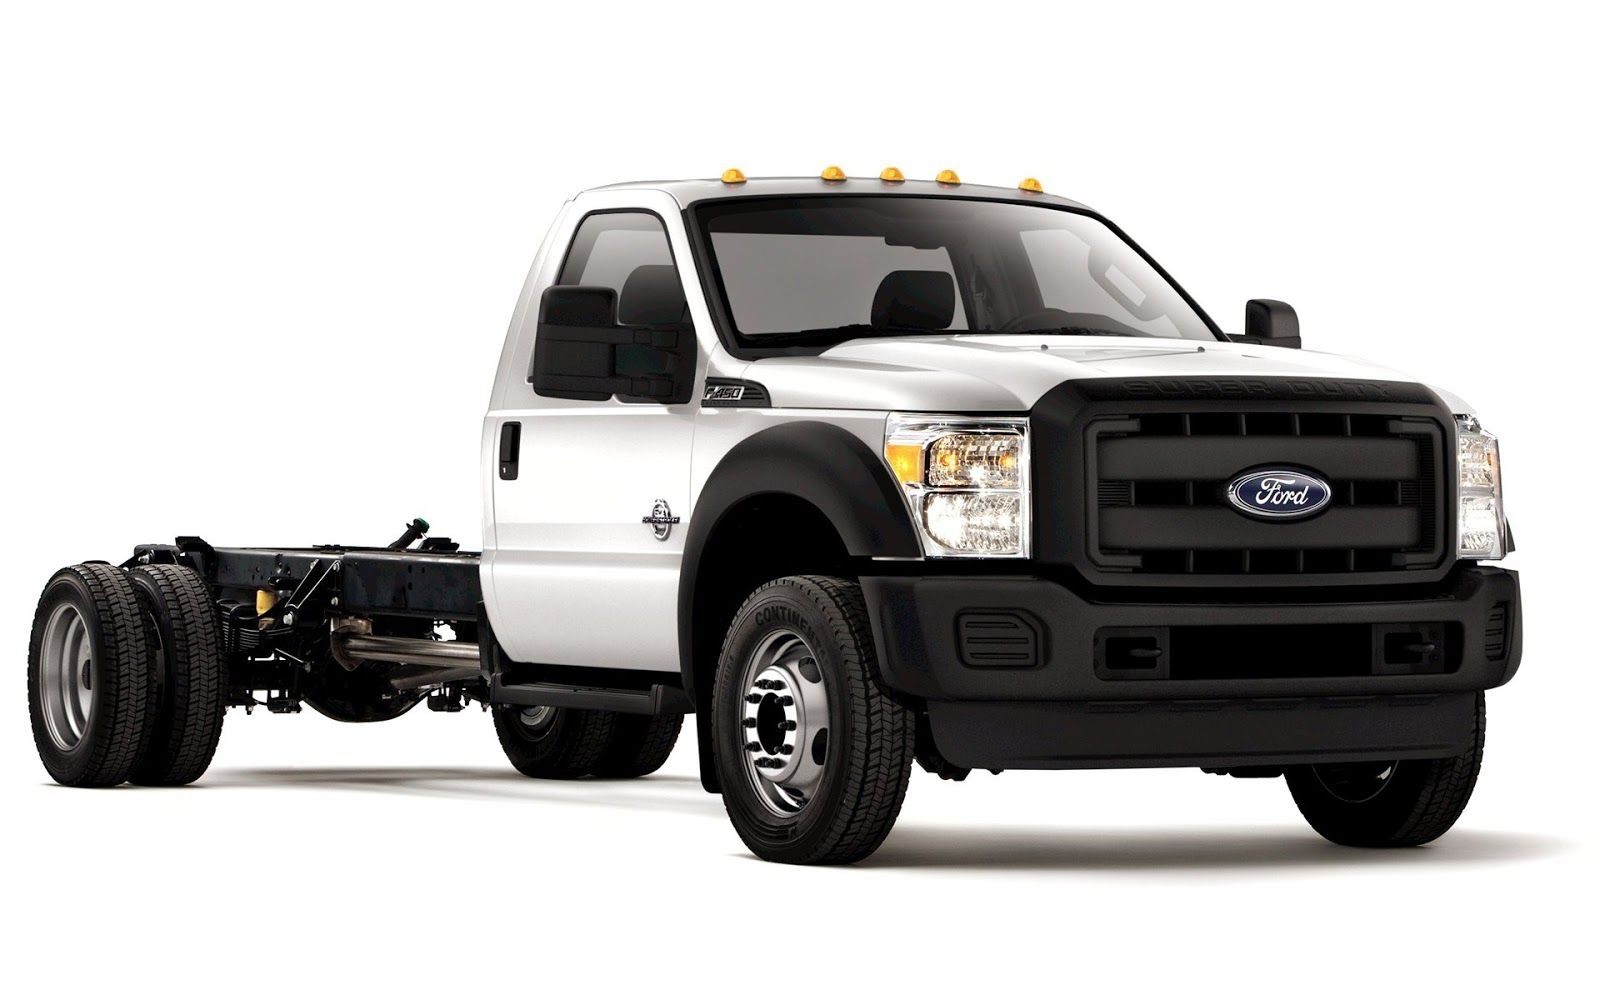 Wallpaper, Specification, Prices Review: Ford F 450 Super Duty Spy Photo